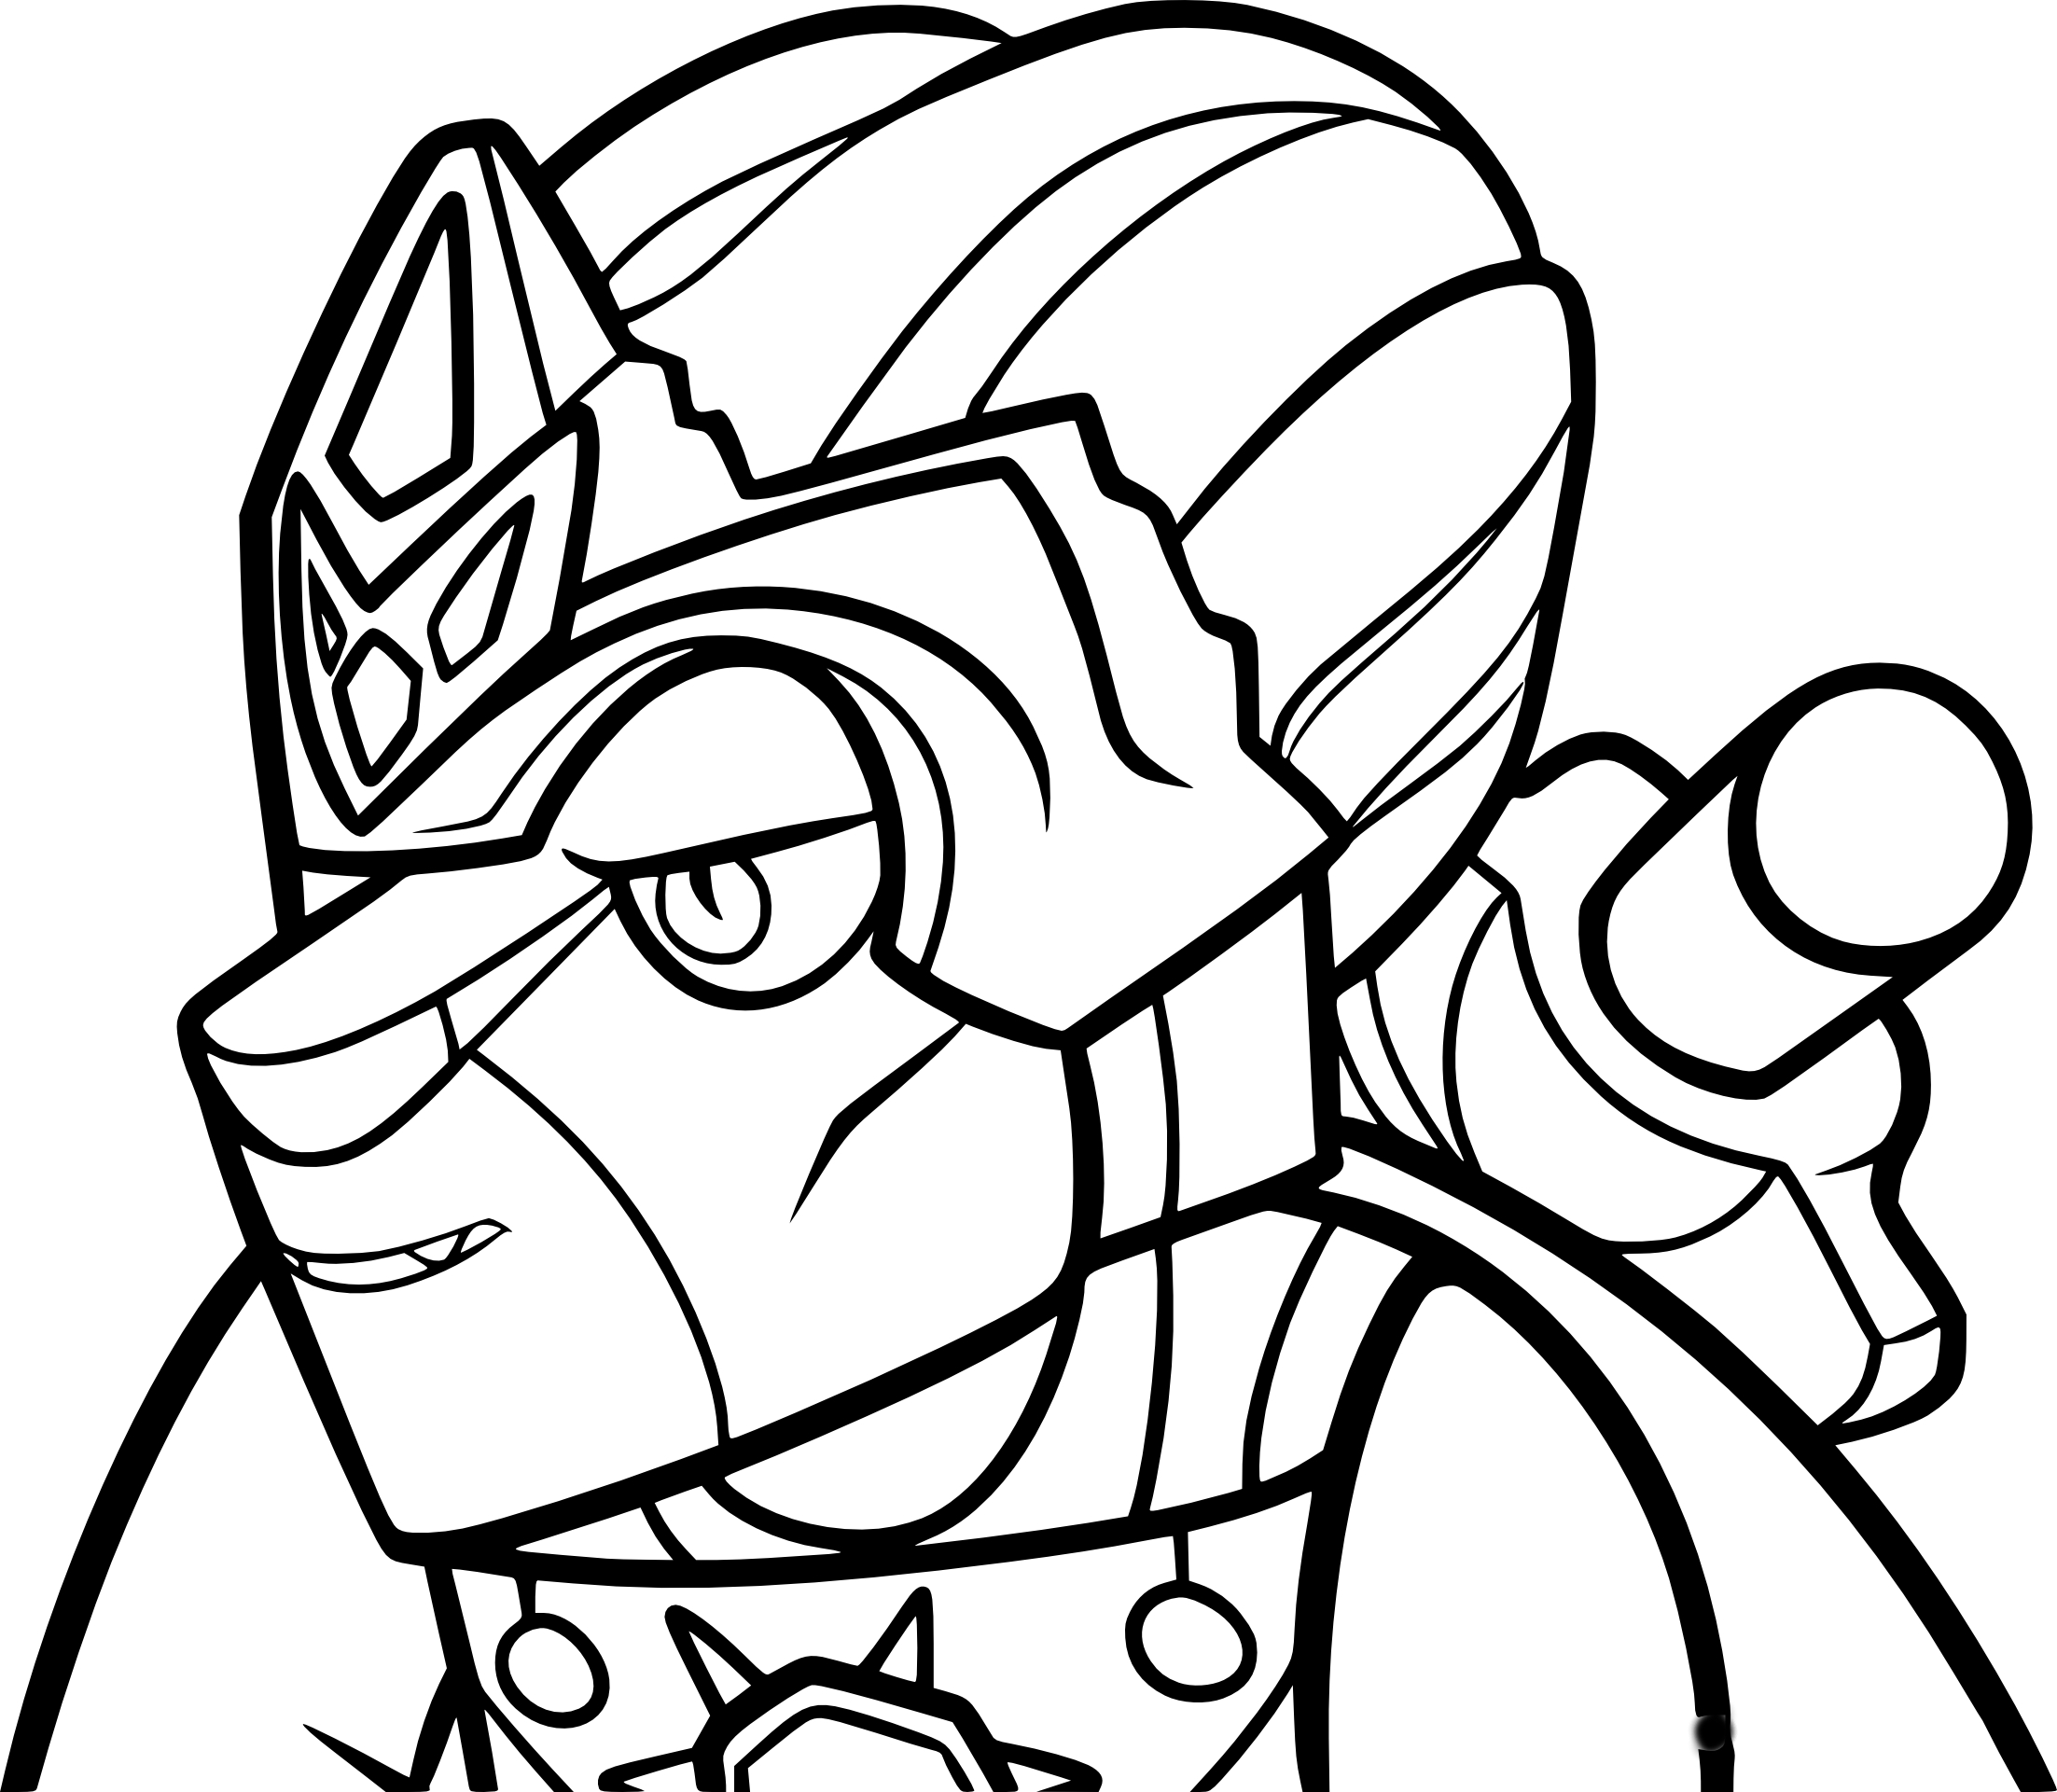 Chima Lion coloring page